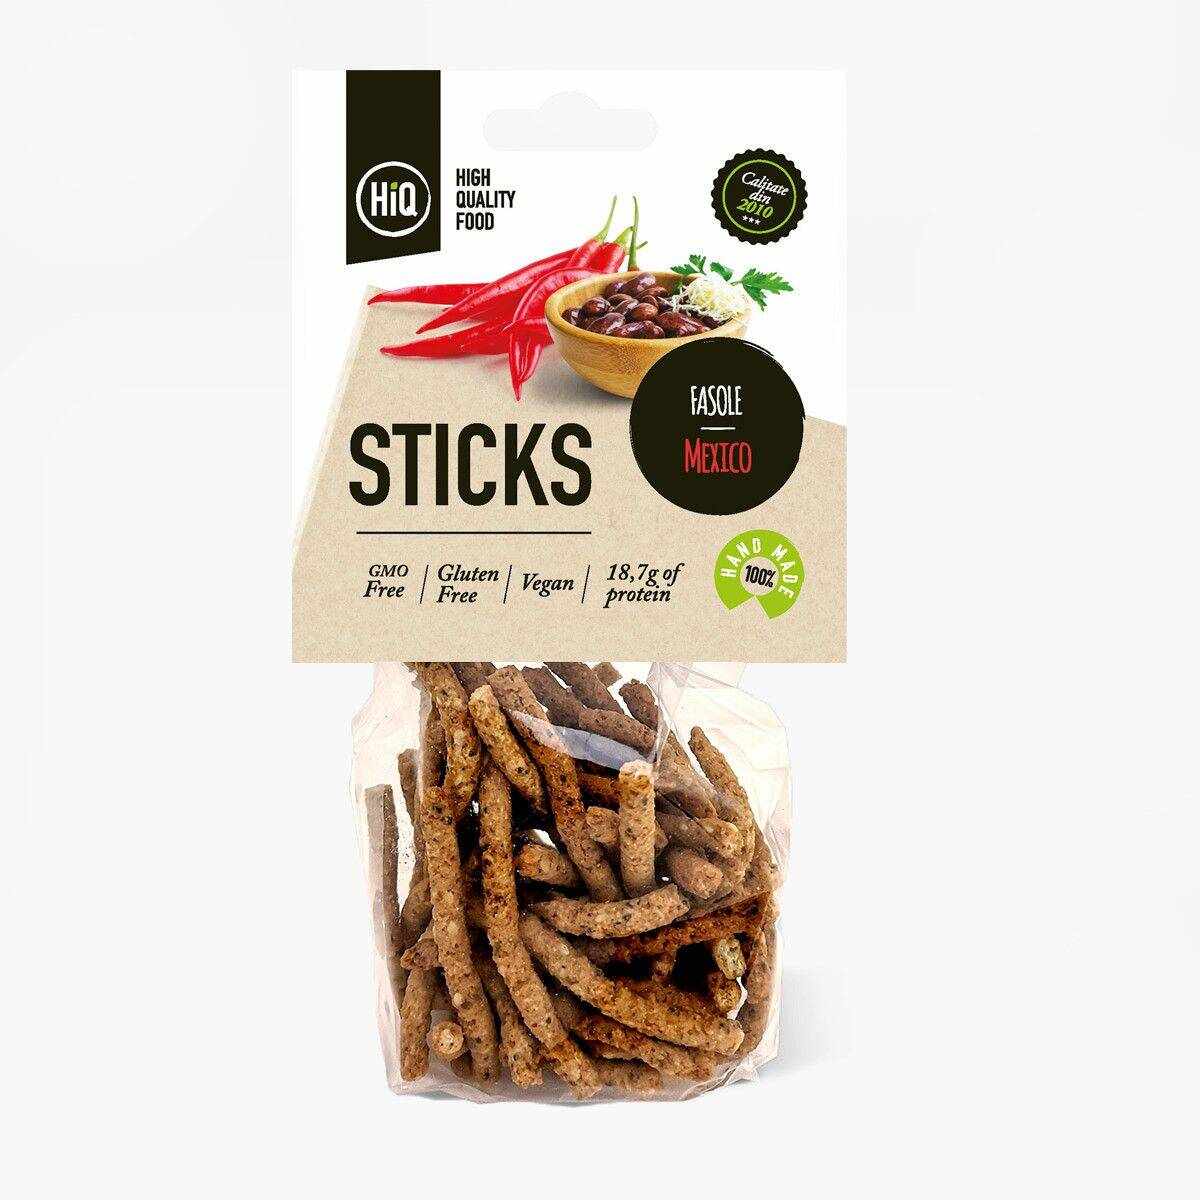 Sticks FASOLE MEXICO Proteic Vegan 70g, Yes Chips